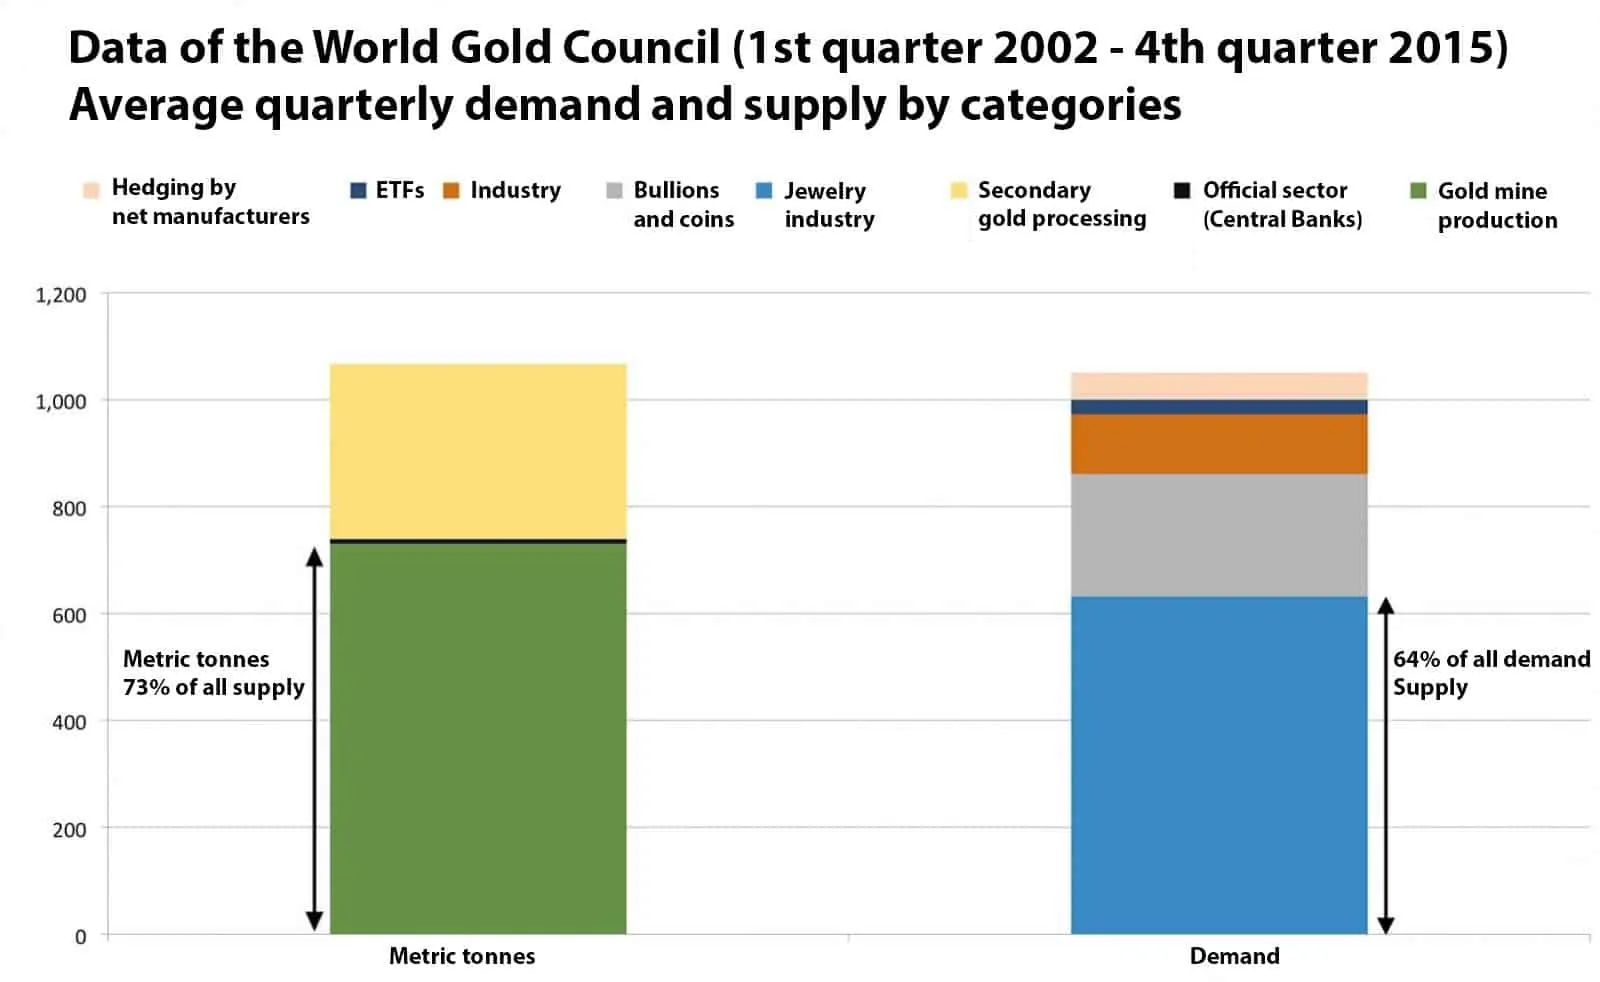 Data of the World Gold Council (1st quarter 2002 - 4th quarter 2015) Average quarterly demand and supply by categories